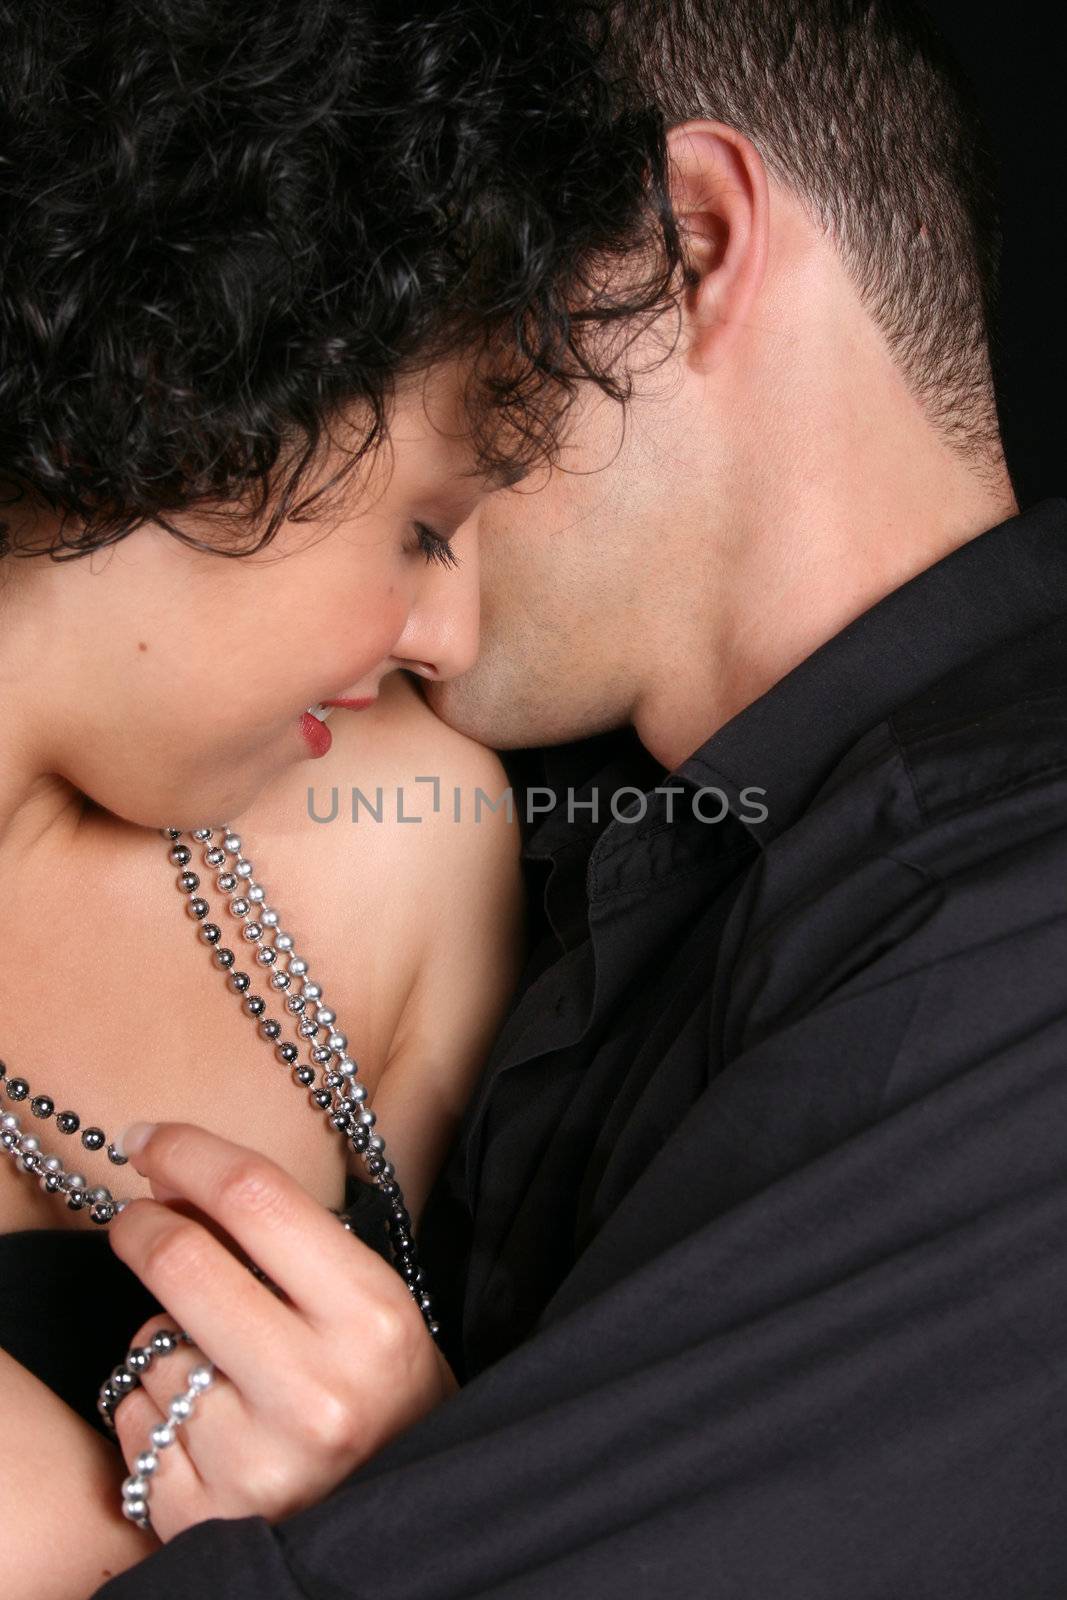 Loving couple in an embrace, female looking down